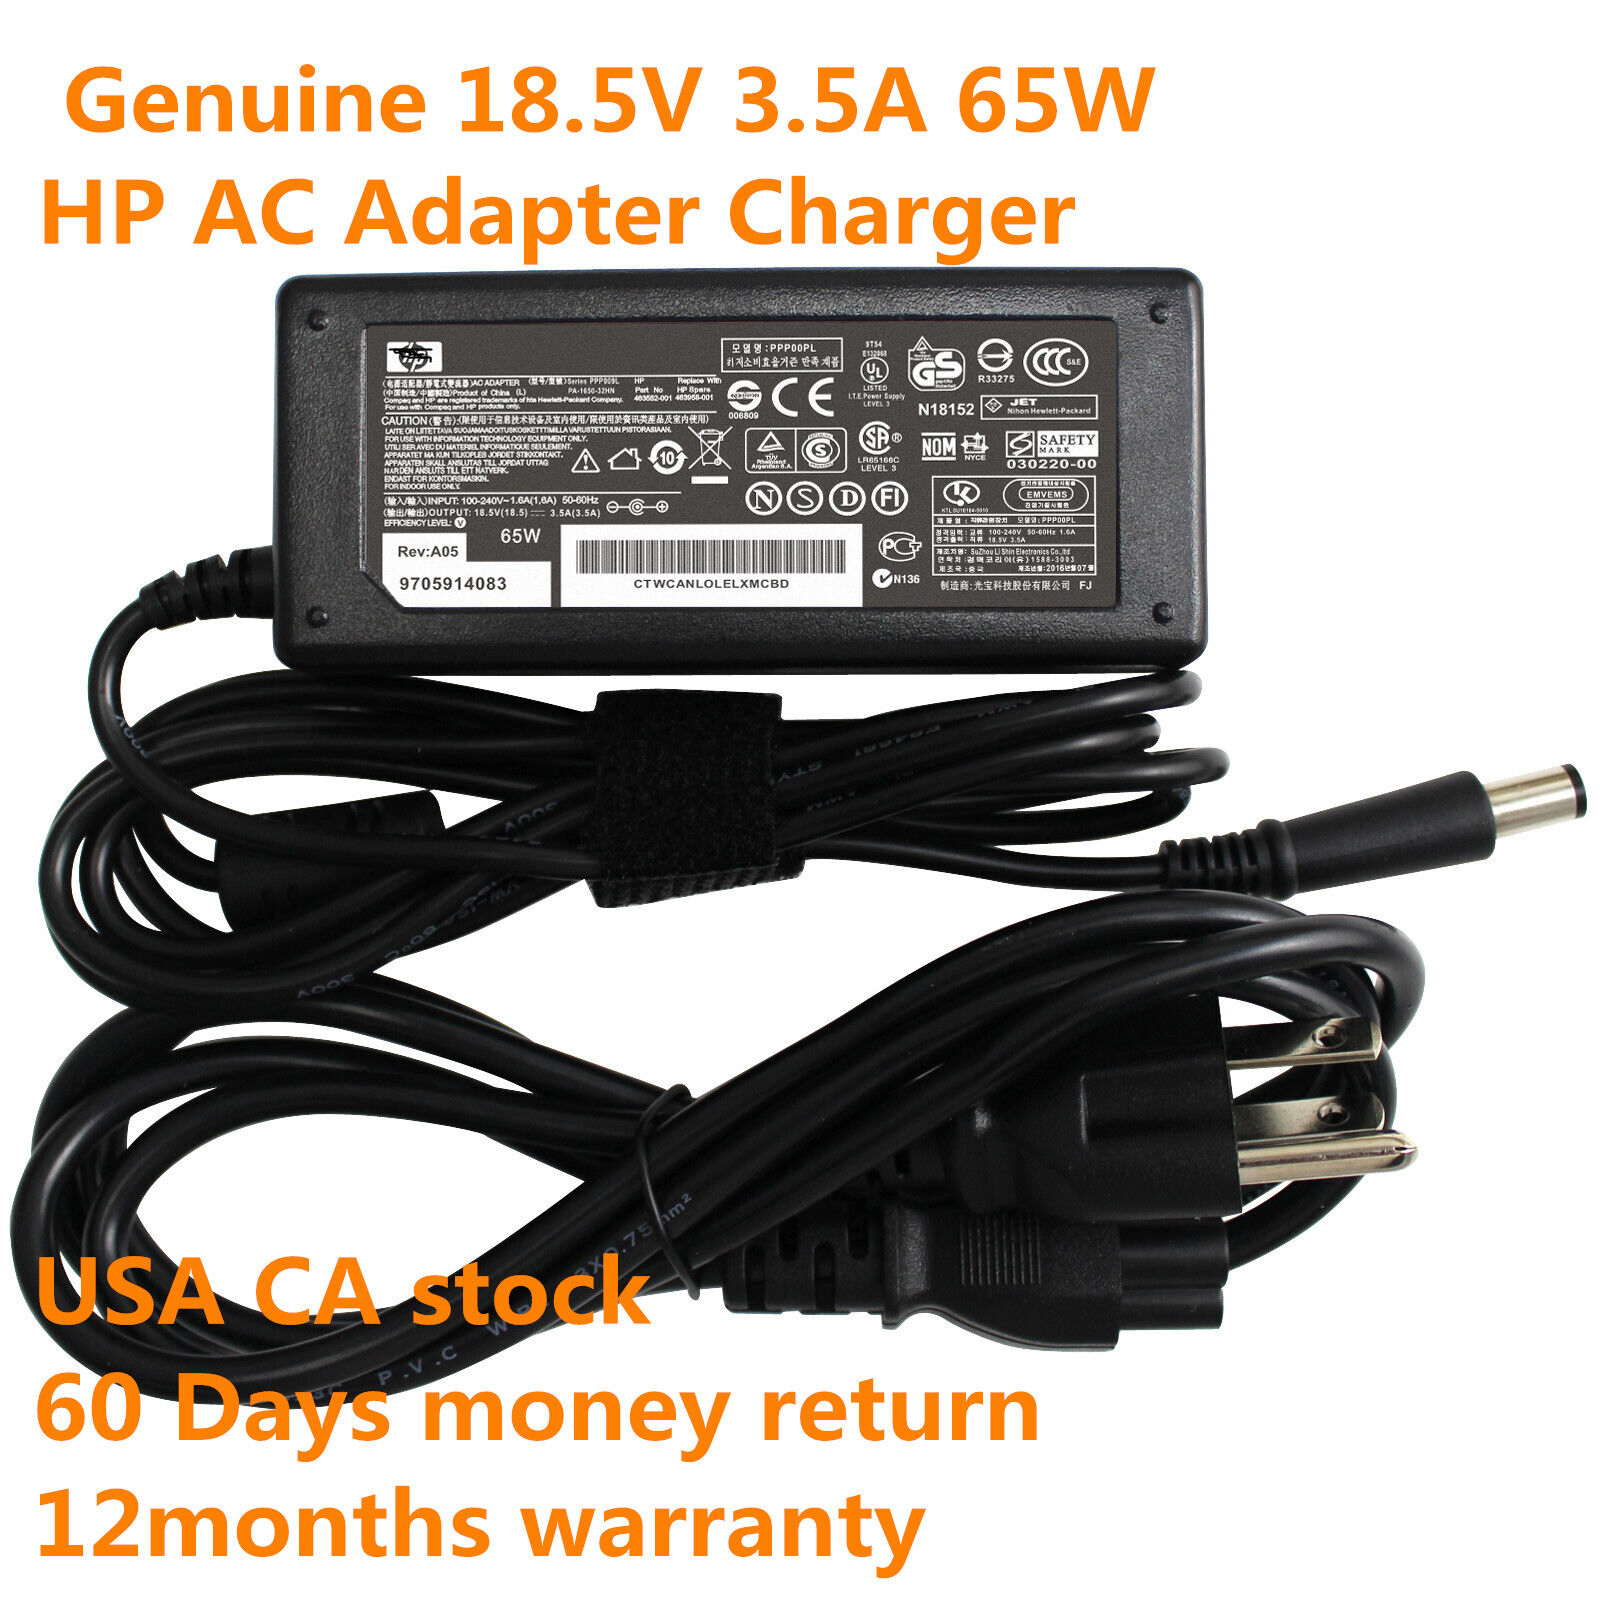 NEW Genuine 65W forH P AC Adapter Charger Pavilion G4 G6 G7 G32 G42 G56 G60 G7